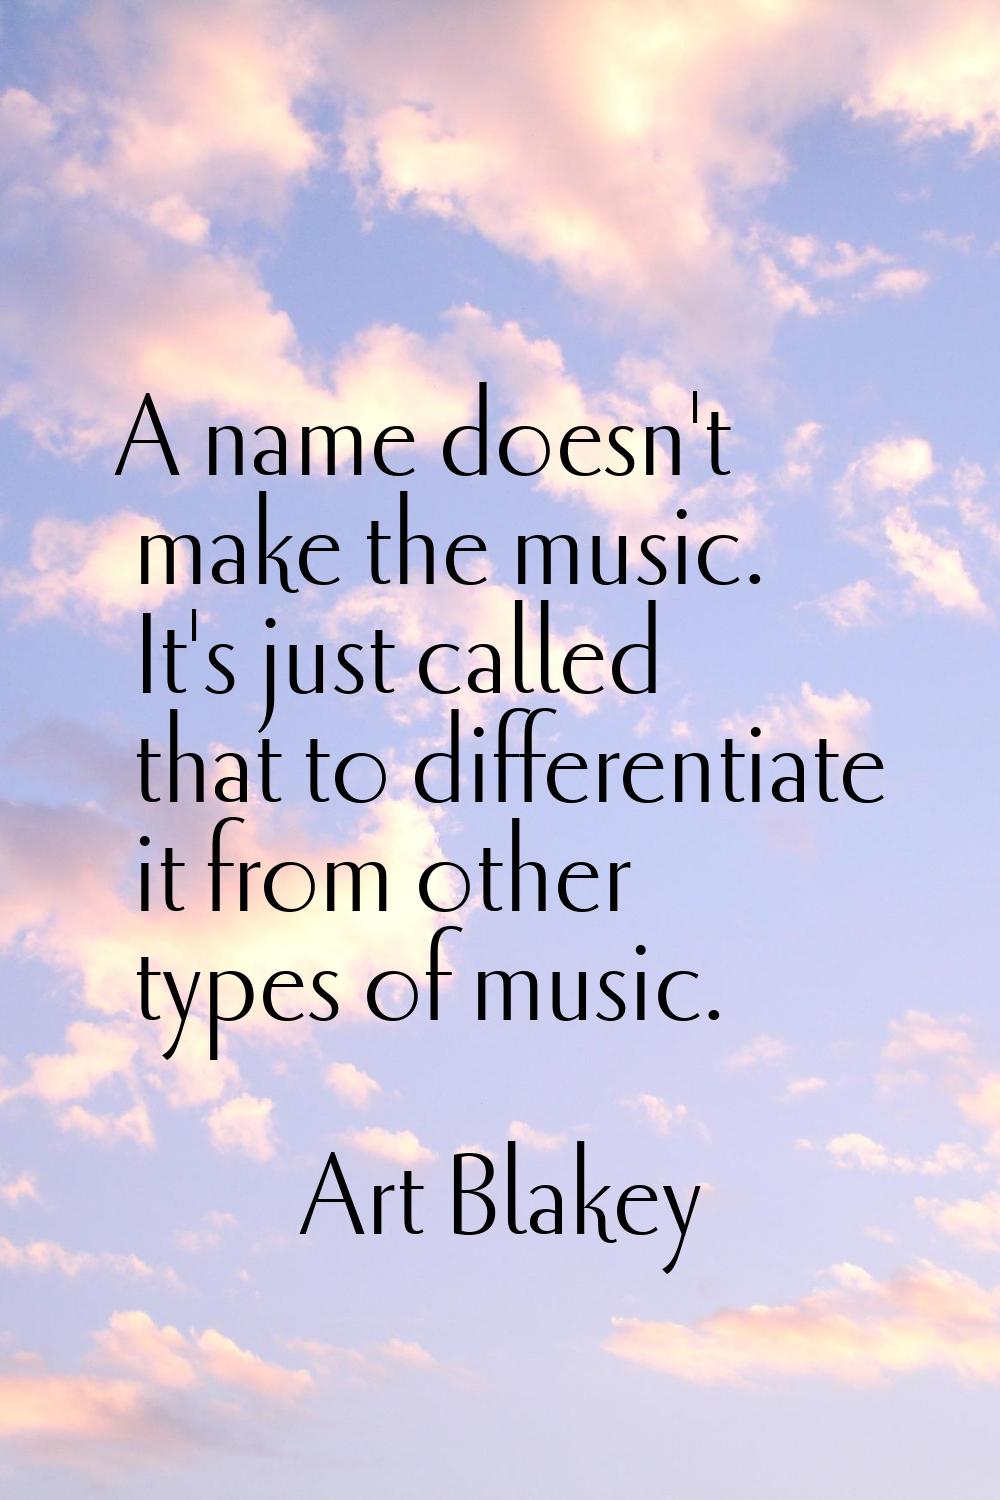 A name doesn't make the music. It's just called that to differentiate it from other types of music.